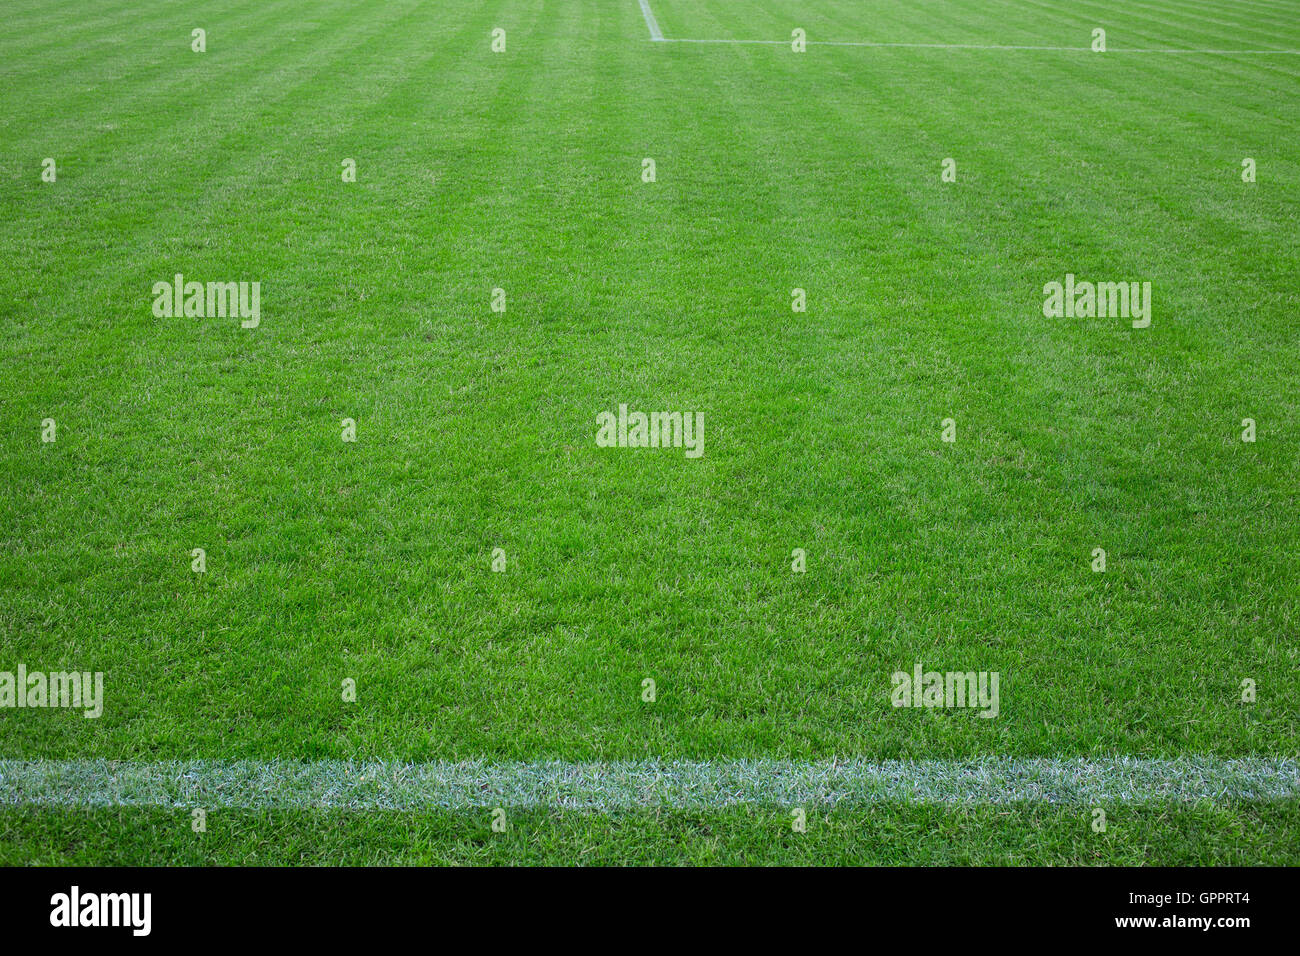 Football field with green grass and horizontal white line Stock Photo